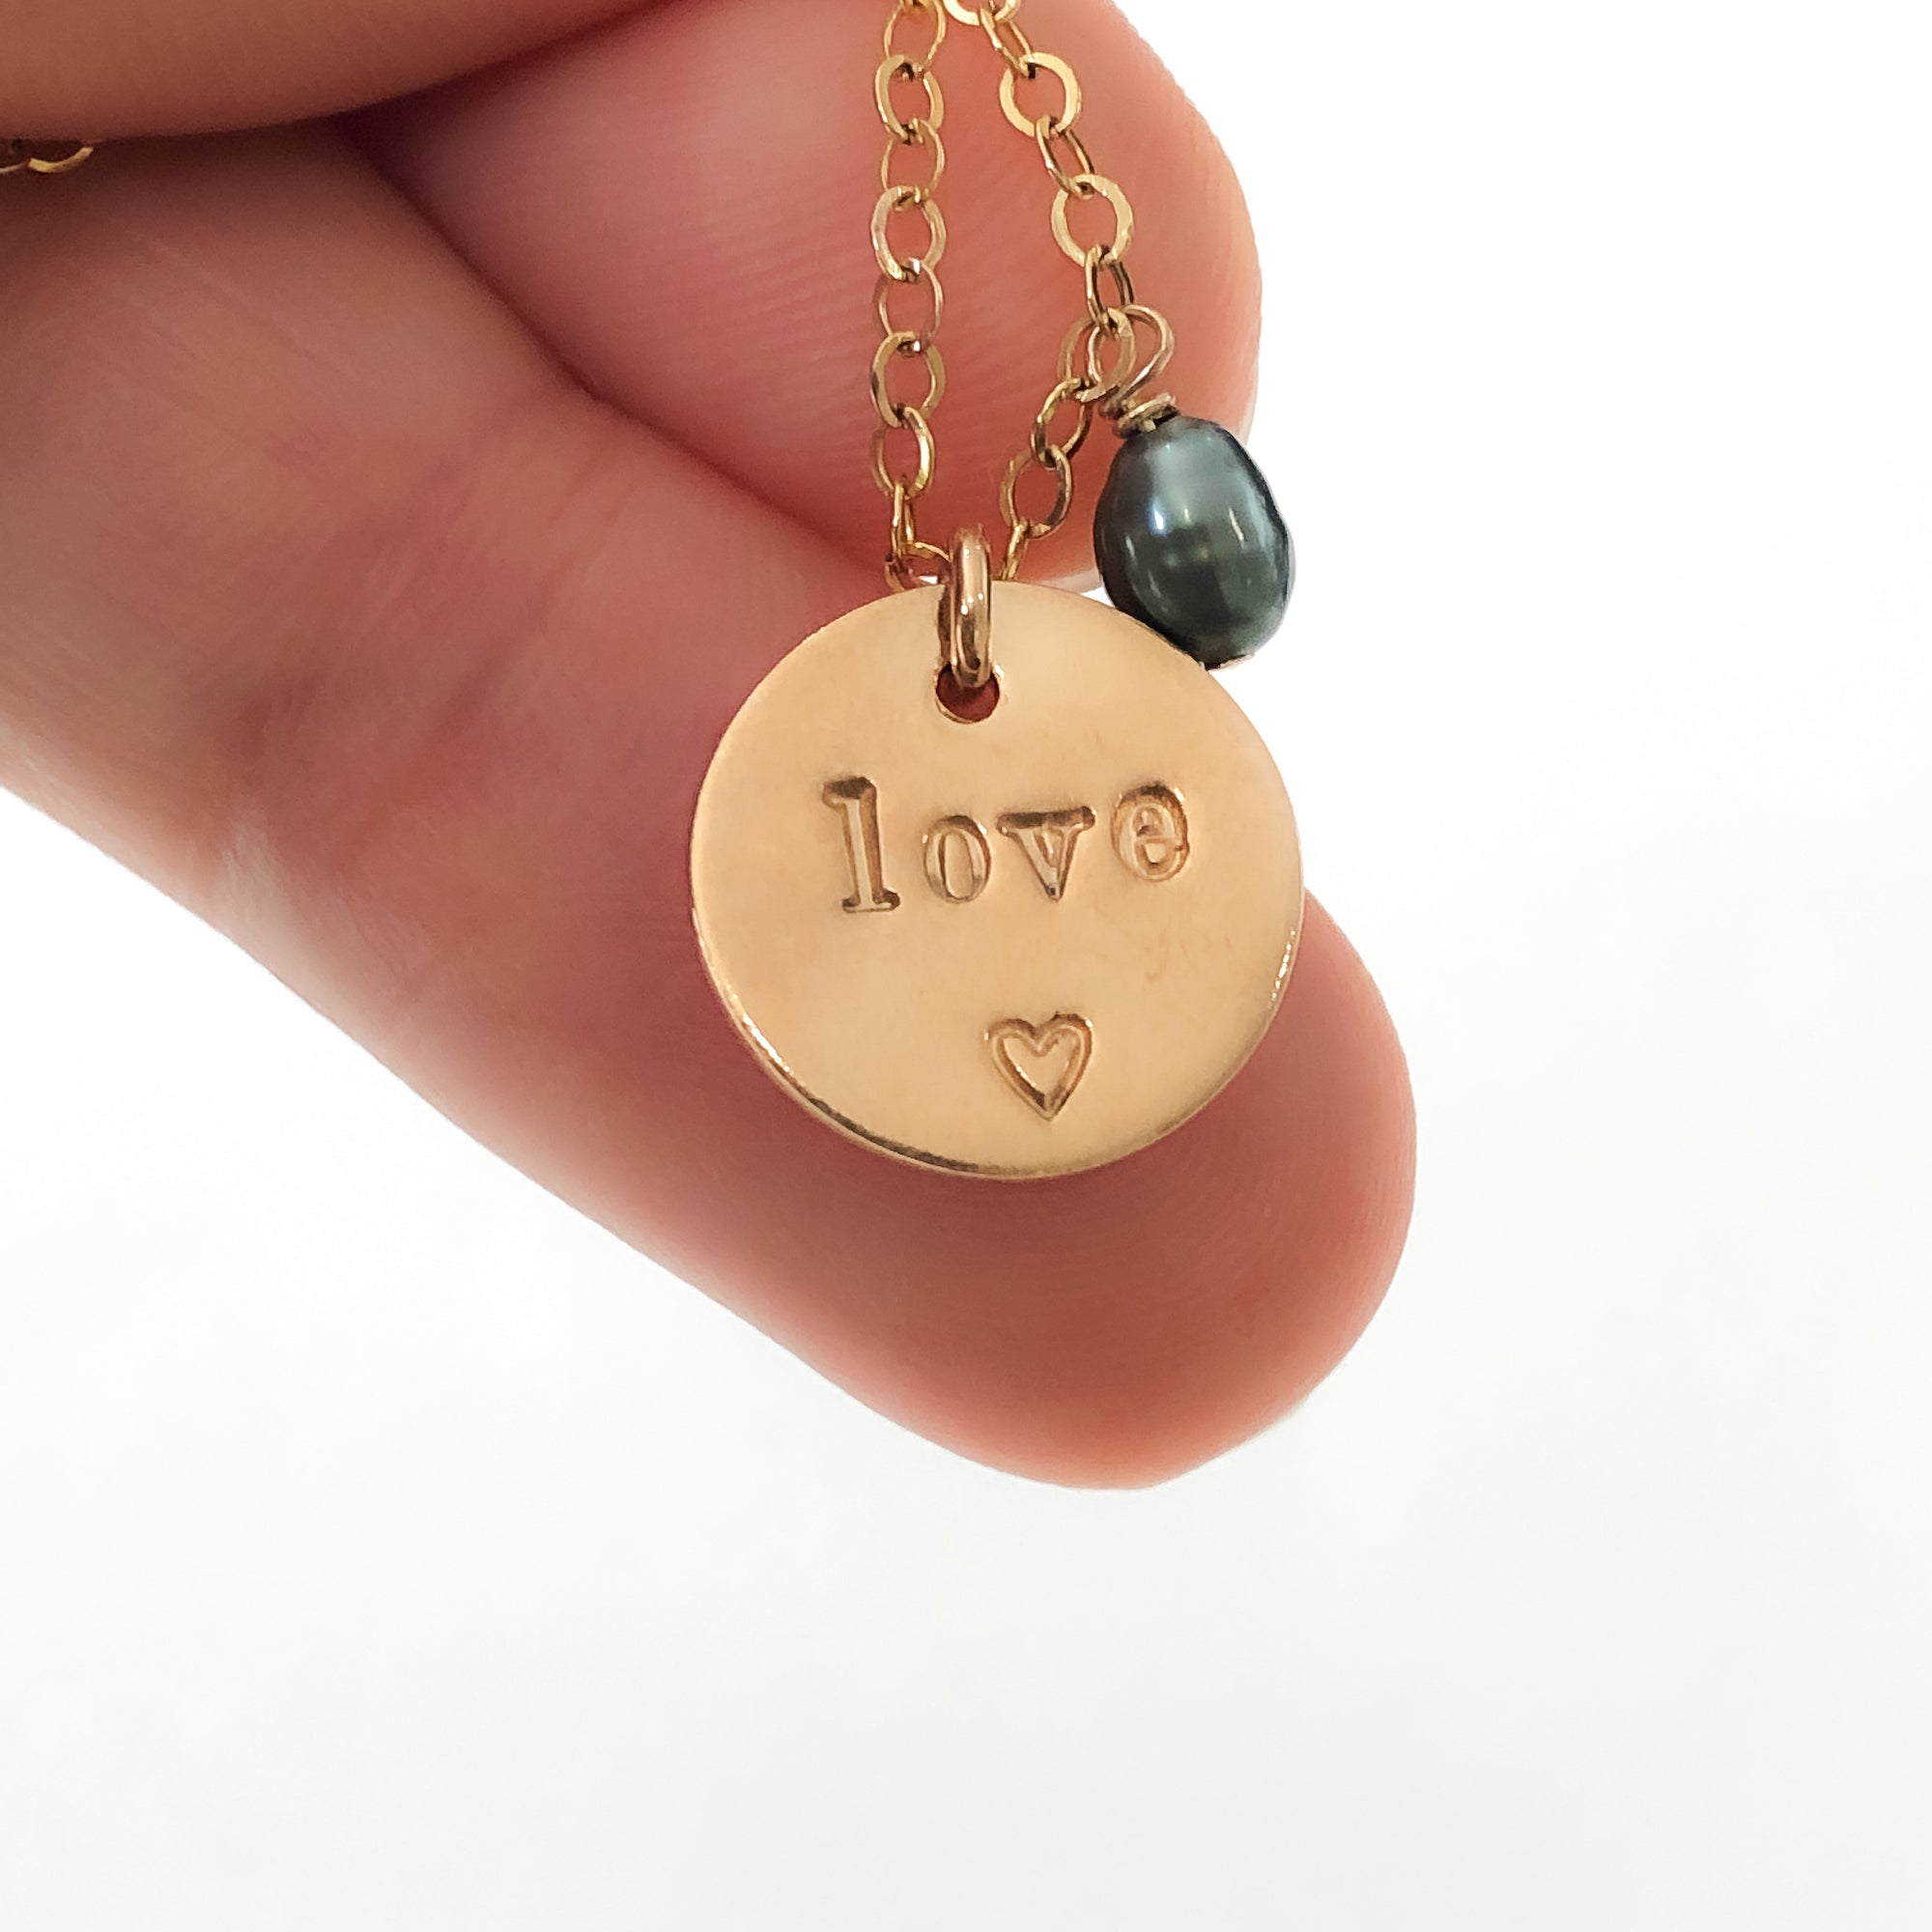 Handstamped Tag Necklace with Pearl